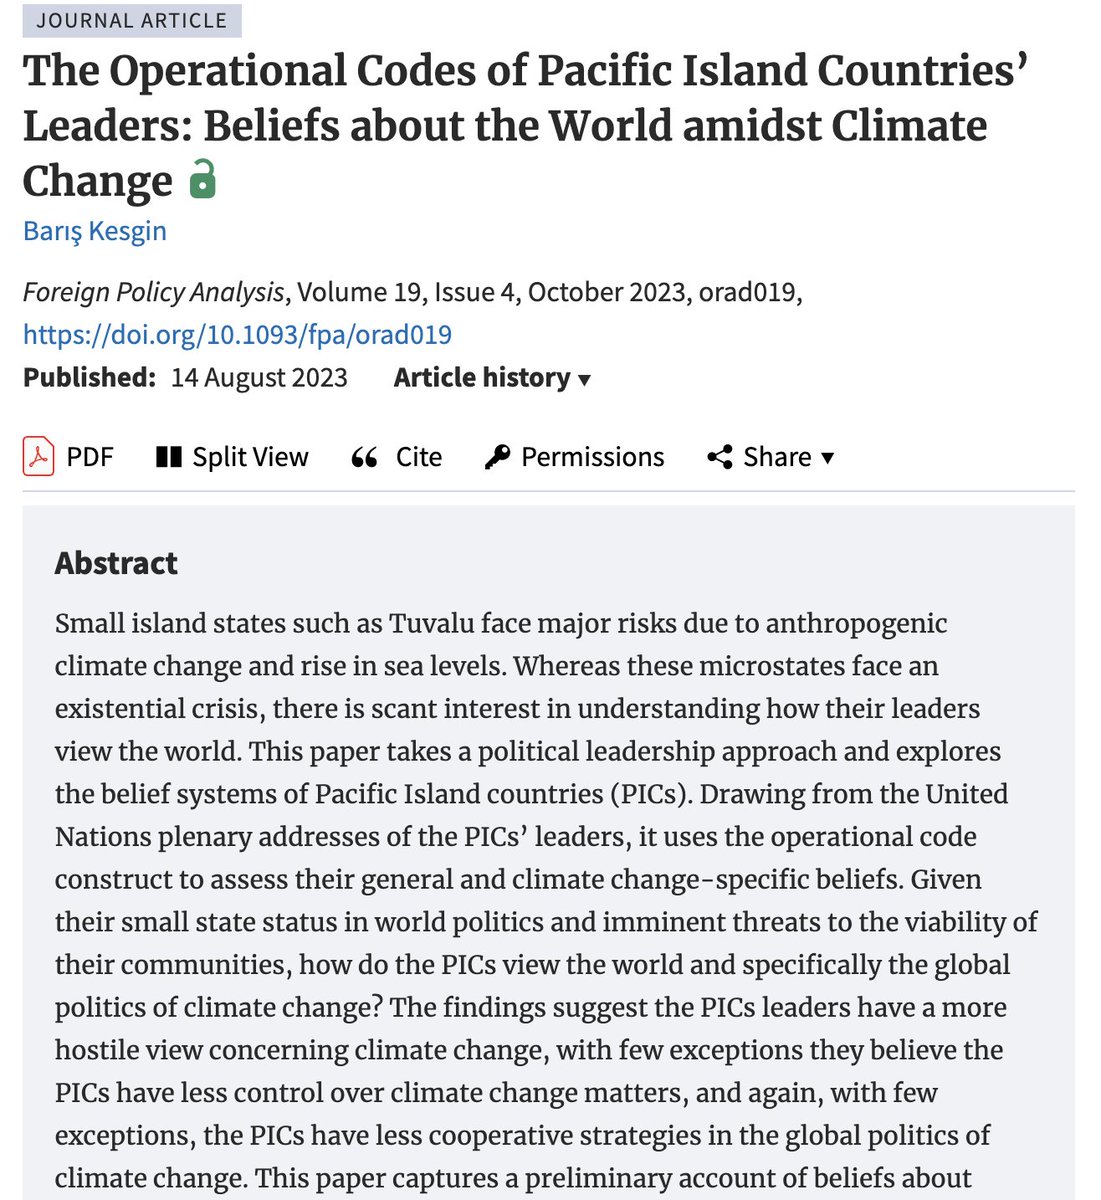 How do small island states facing a climate crisis view the world? @baris_kesgin assesses PIC leaders' beliefs finding they hold a more hostile view of climate change, perceive less control over climate matters, and have less cooperative strategies. academic.oup.com/fpa/article/19…